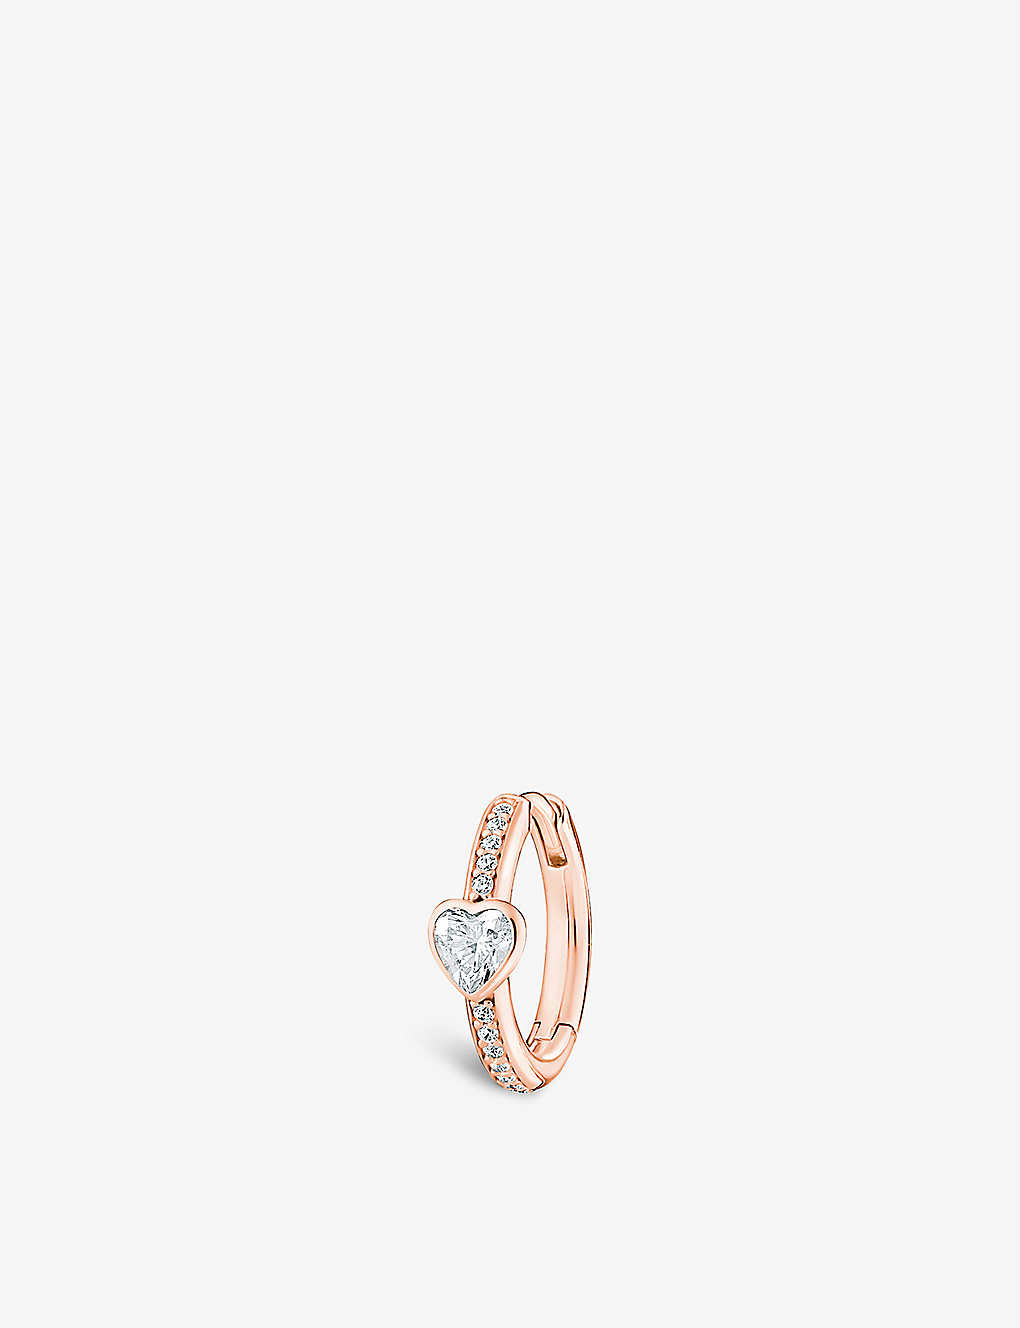 Thomas Sabo Heart 18ct Rose-gold Plated Sterling-silver And Zirconia Single Hoop Earring In White